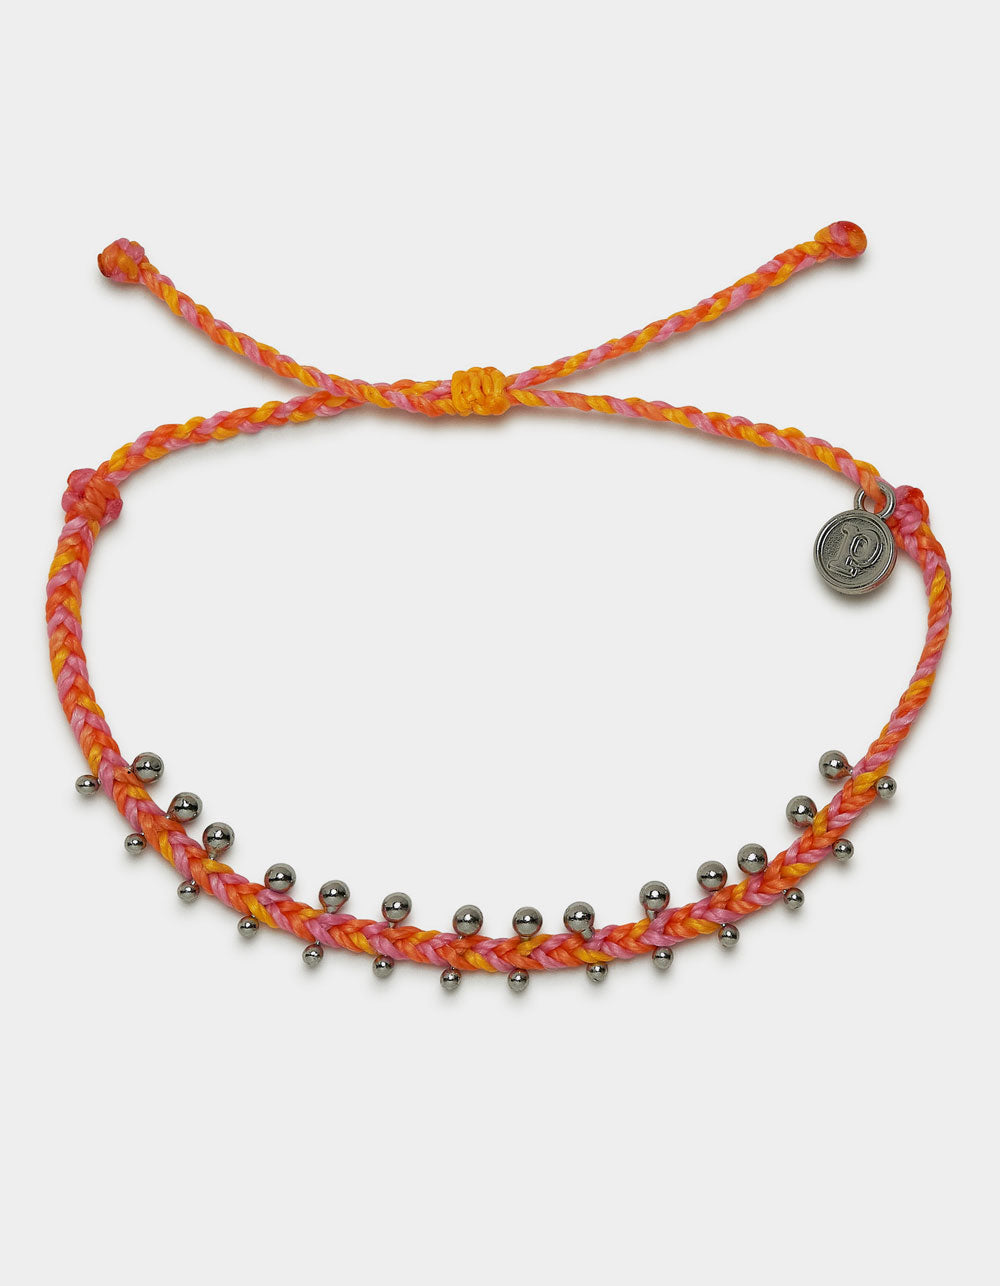 Pura Vida braided bracelet in varying shades of orange and pink and silver beads with a Pura Vida logo charm